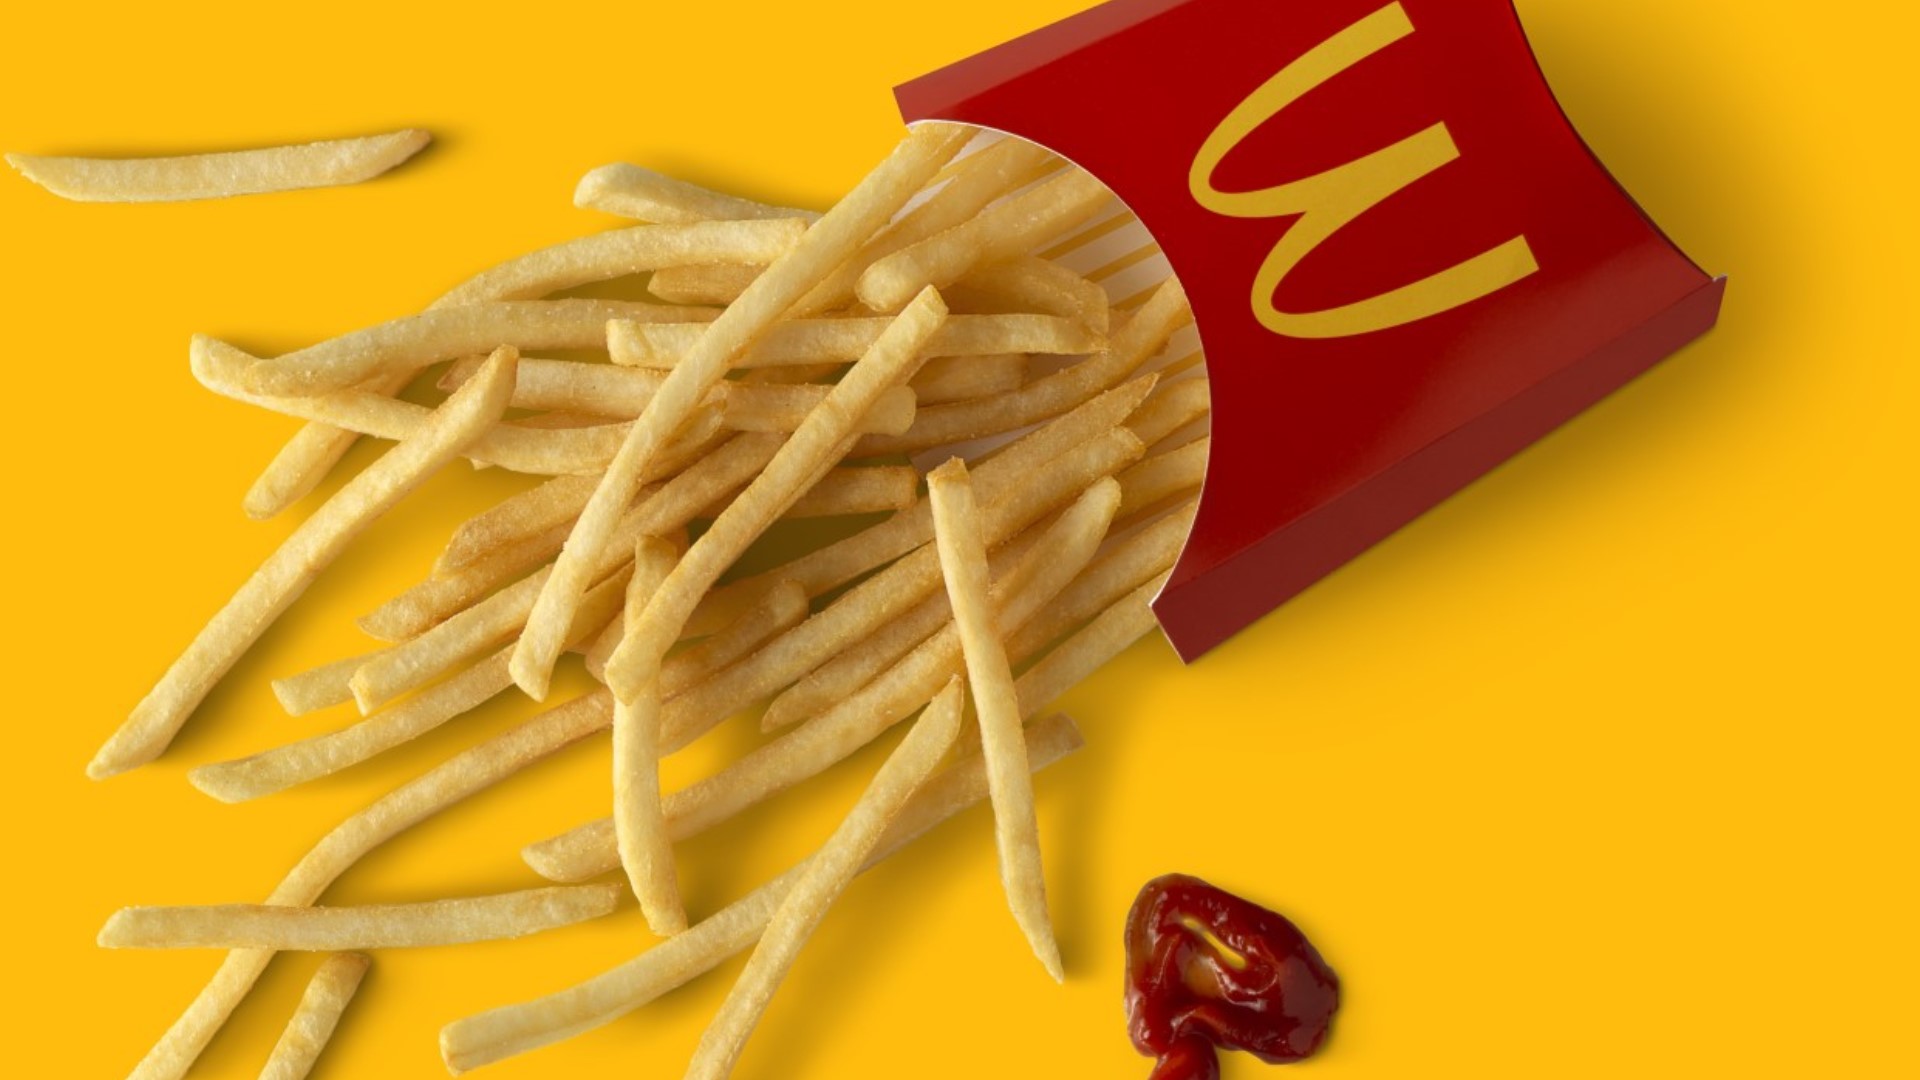 McDonald's offering free fries Monday for National French Fry Day